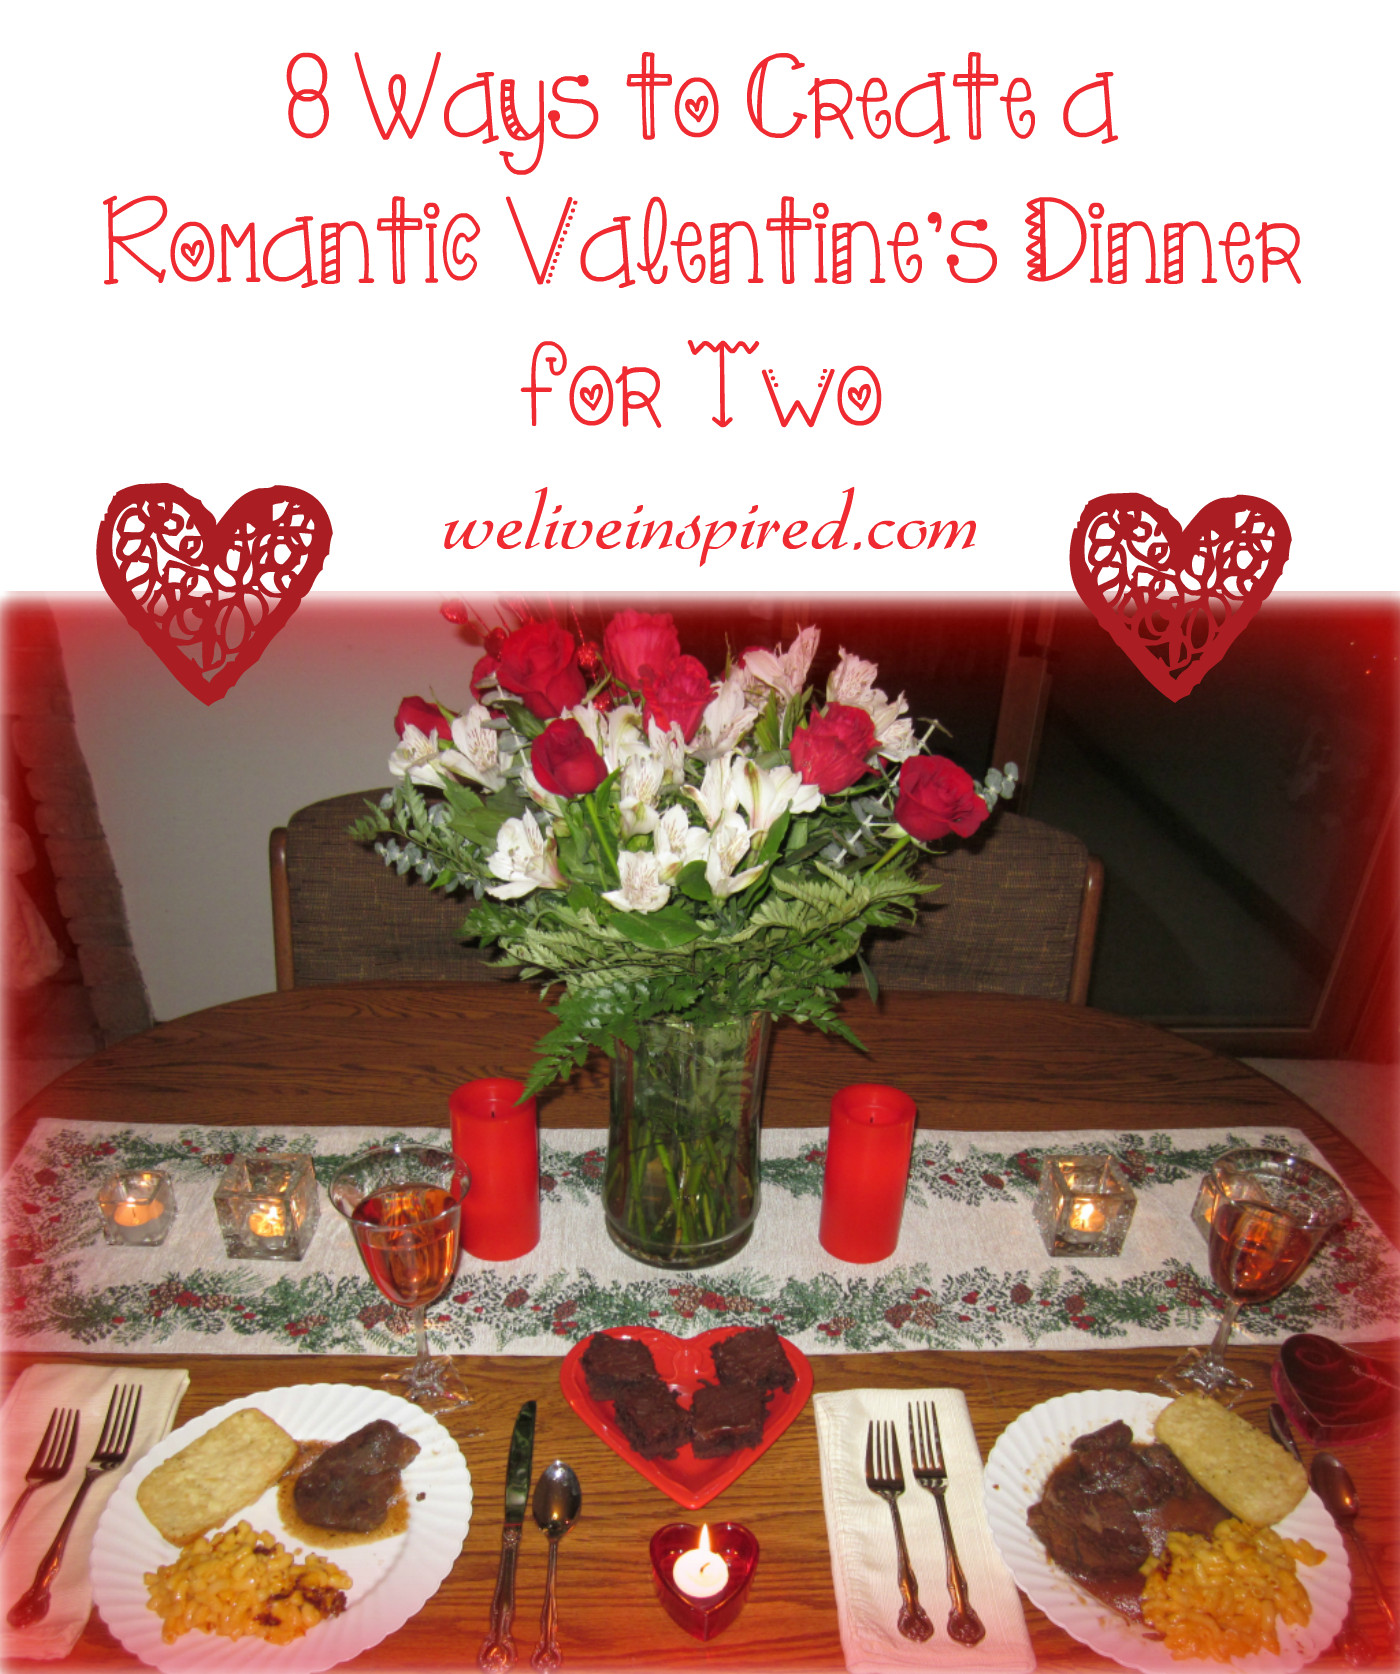 Romantic Valentines Dinners
 8 Ways to Create a Romantic Valentine s Day Dinner for Two